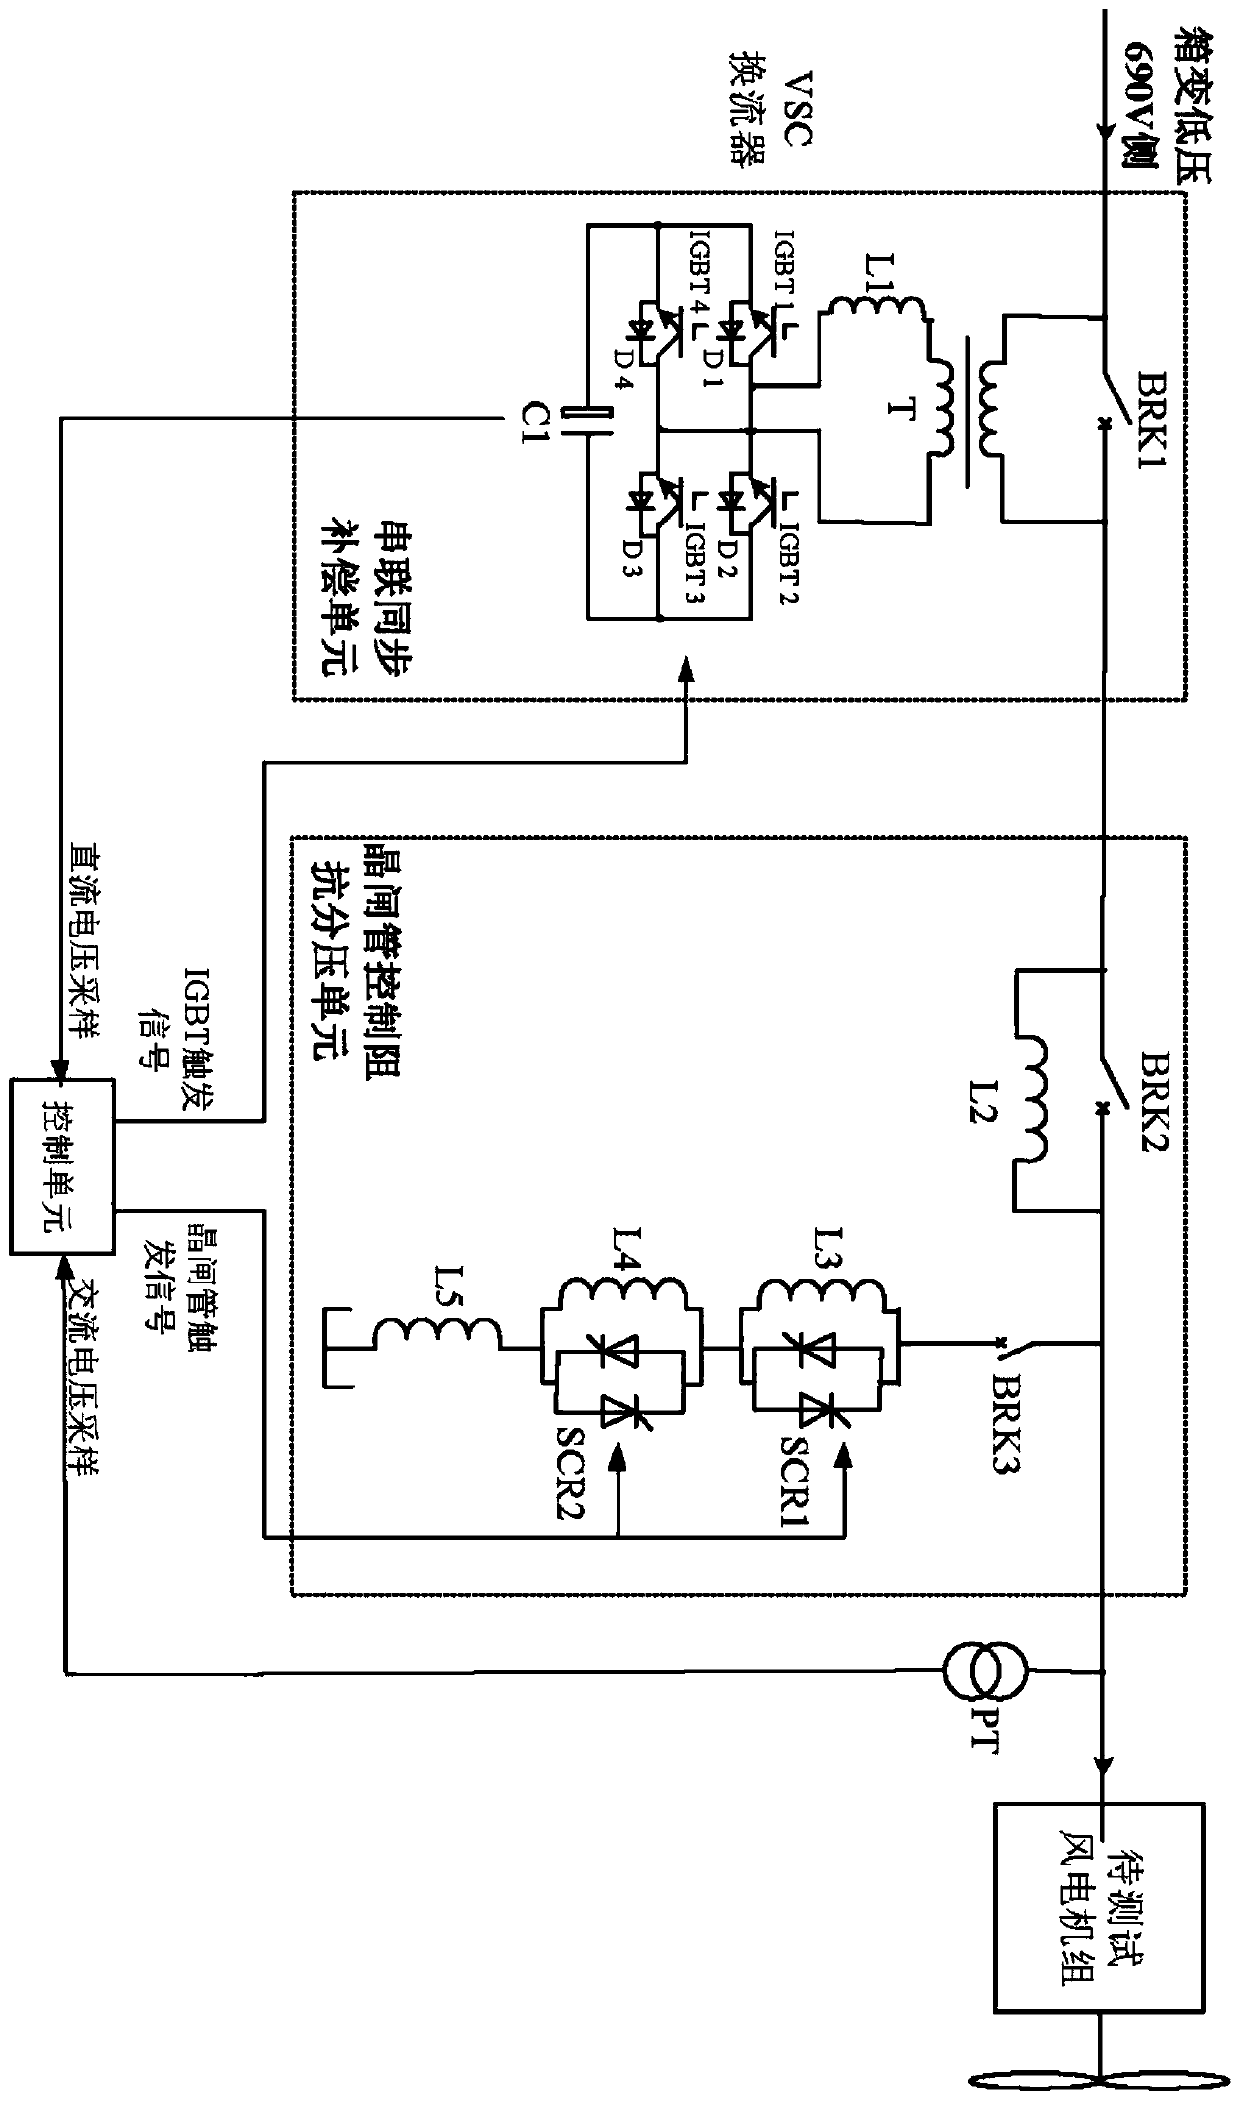 Multi-index voltage disturbance generation device and method for wind turbine generator set grid-connected detection